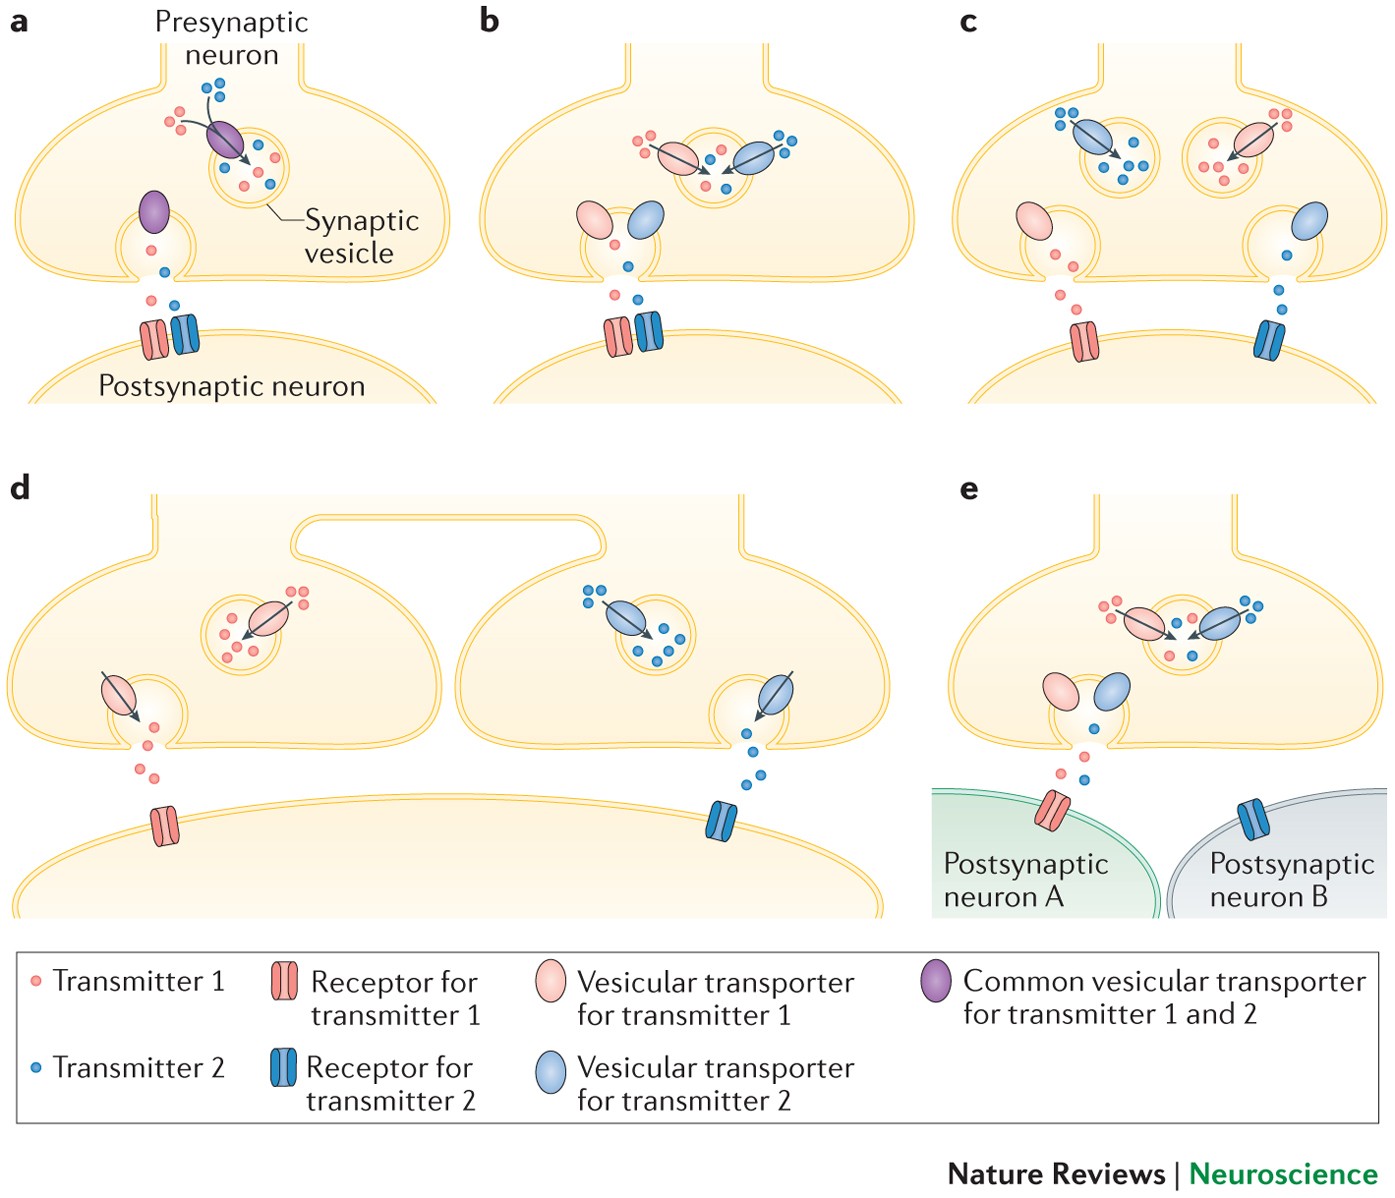 Mechanisms and functions of GABA co-release | Nature Reviews Neuroscience